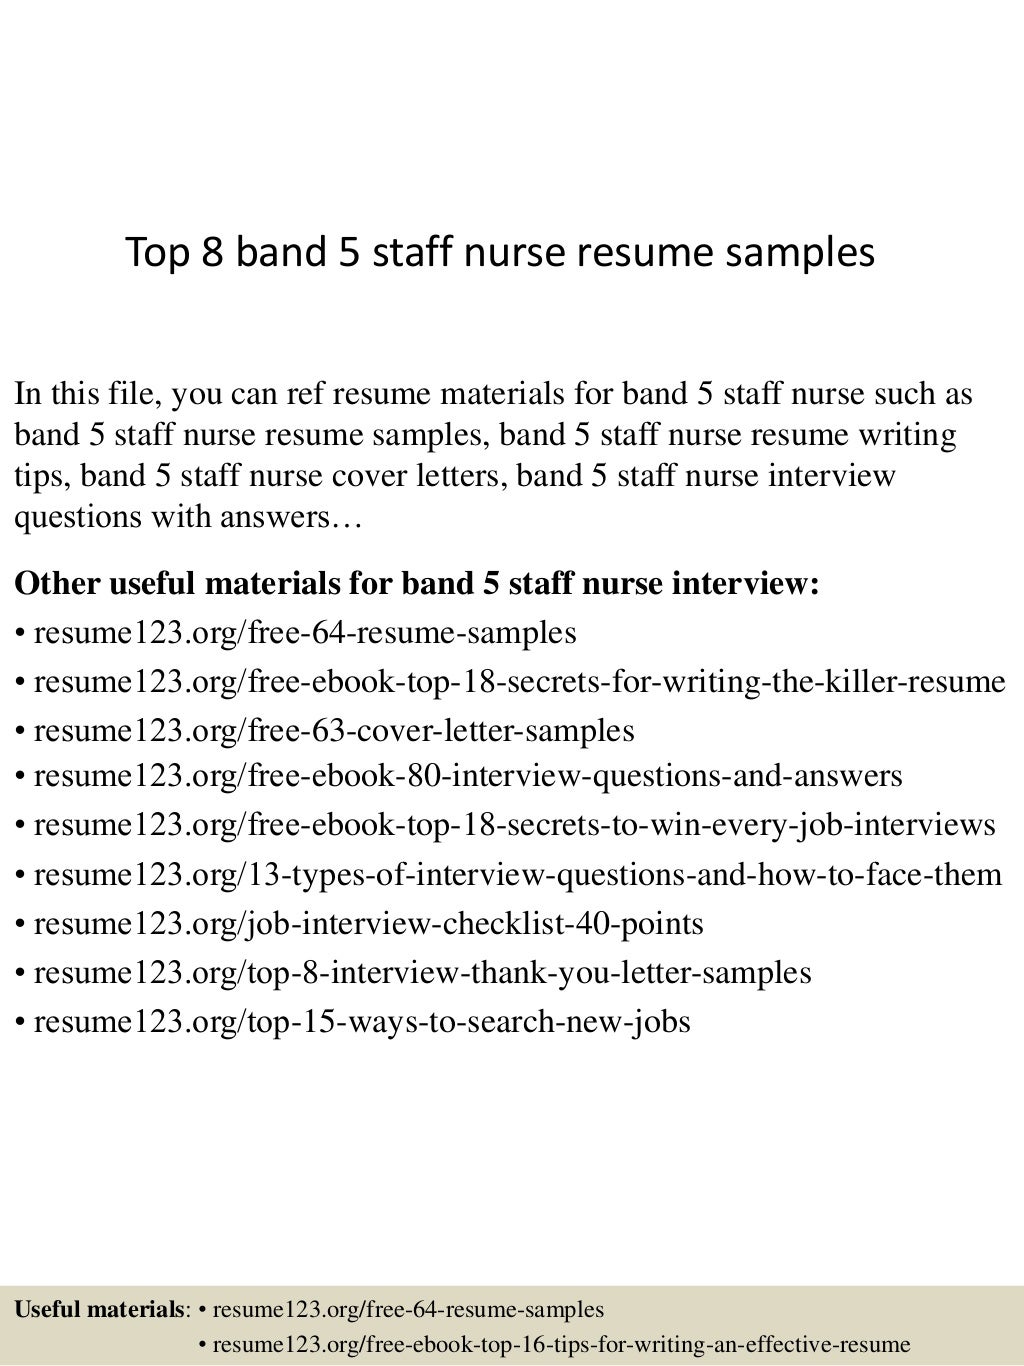 personal statement for band 5 nurse